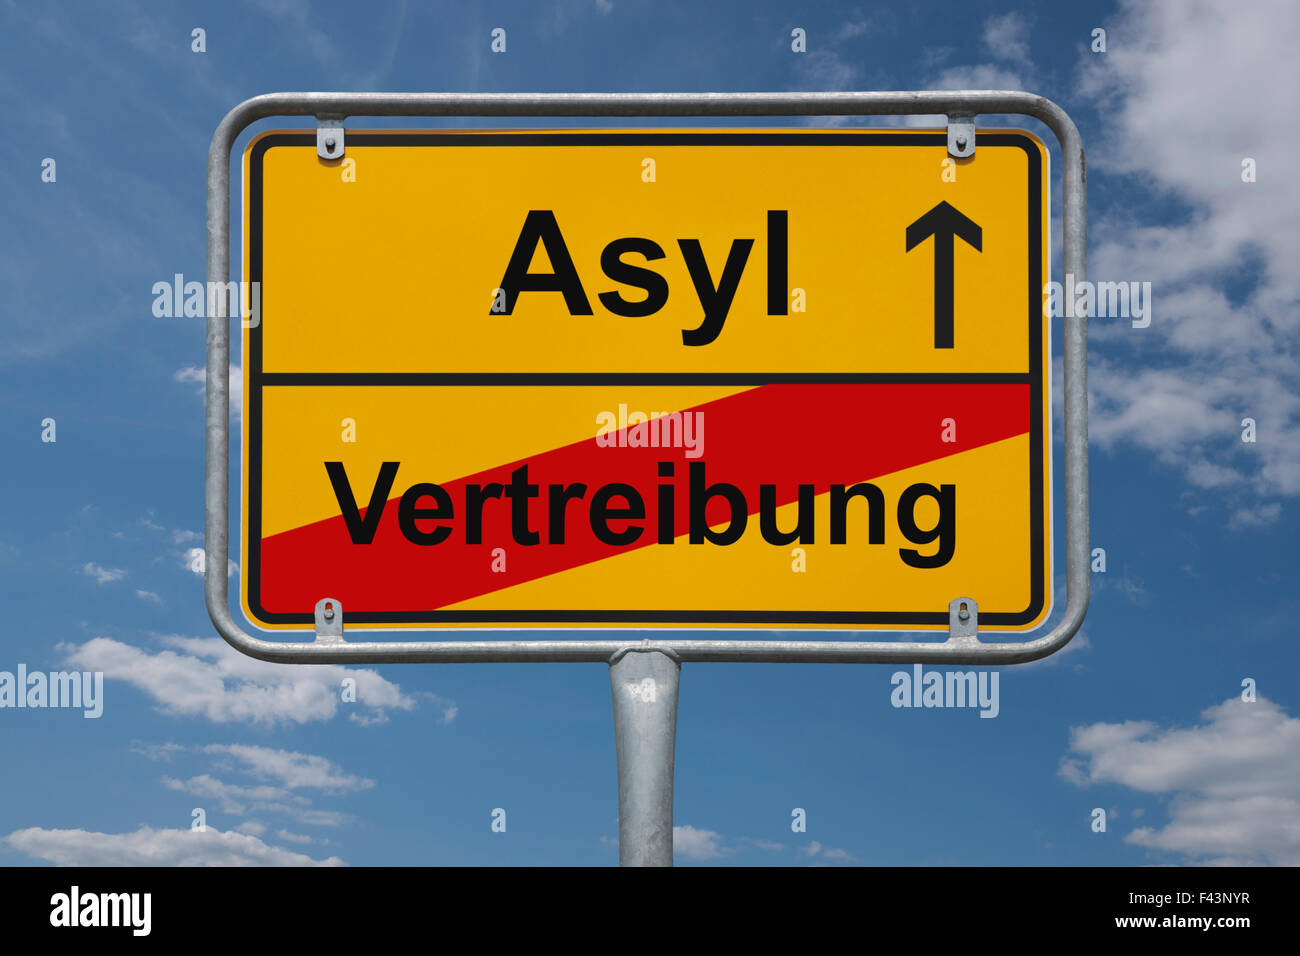 Town sign Germany, End of the town with the inscription Ende Vertreibung (end of expulsion), Beginn Asyl (start Asylum) Stock Photo